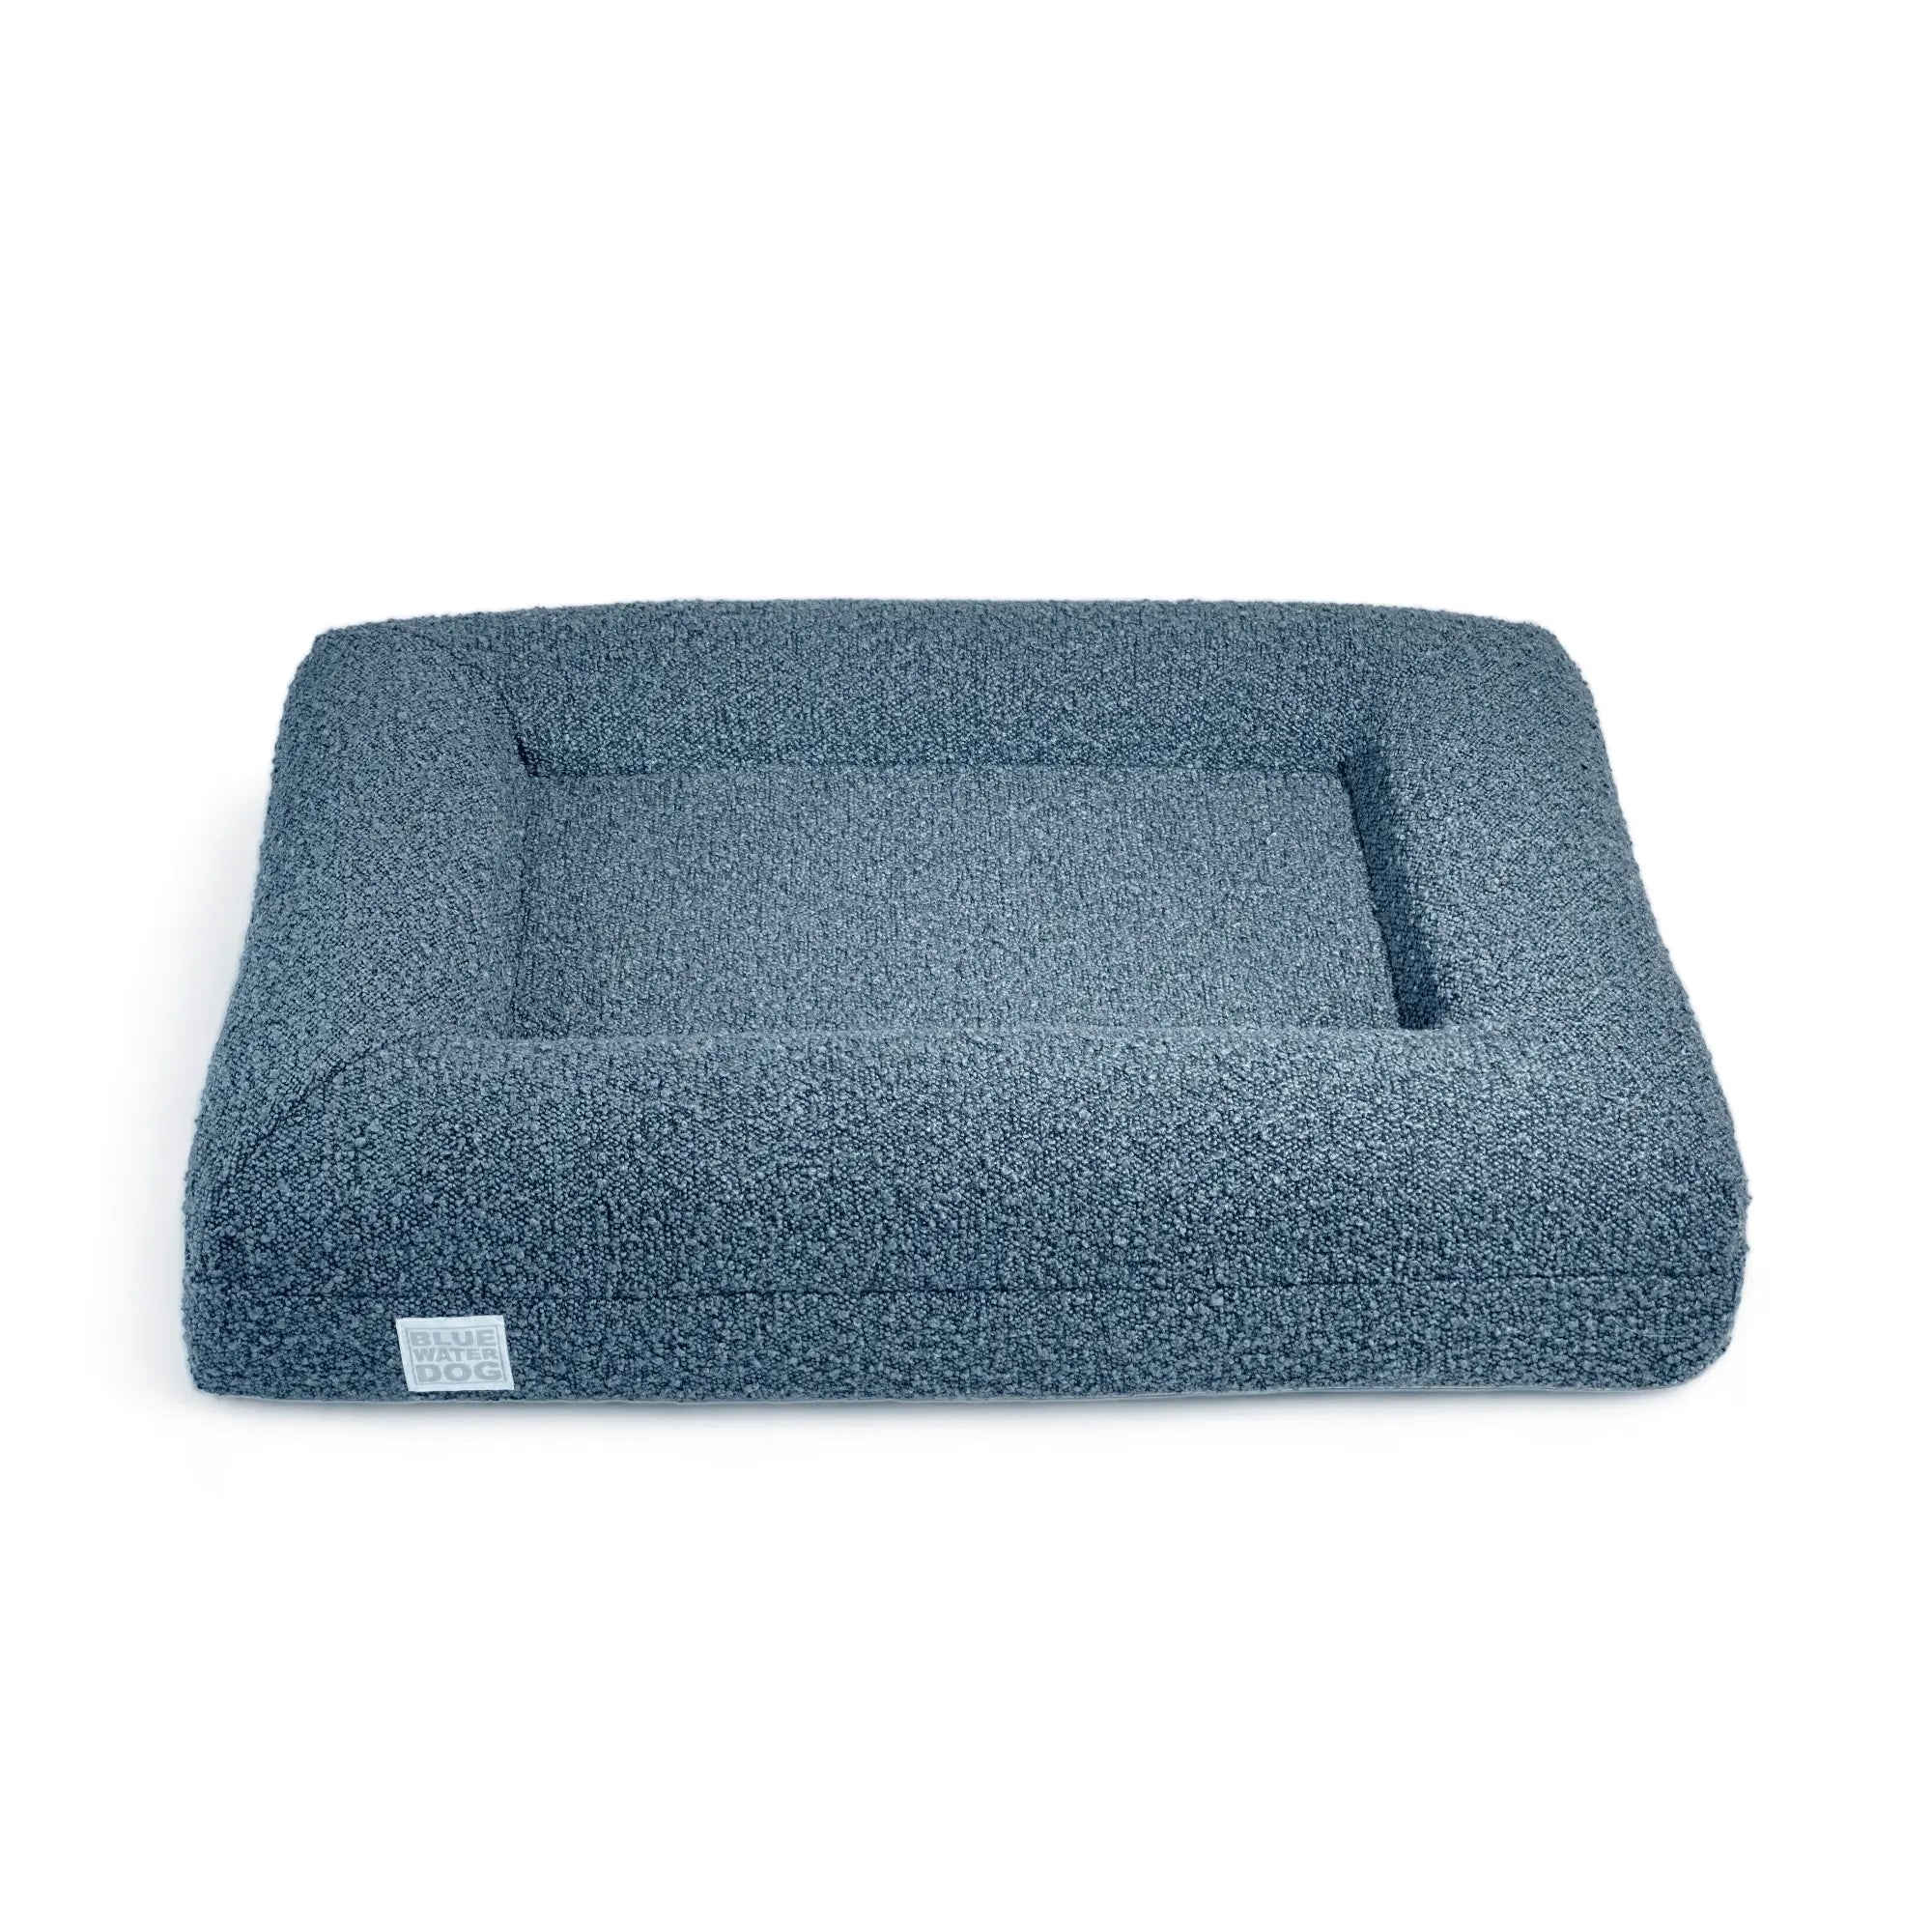 Front of a small, blue-colored orthopedic memory foam rectangular boucle dog bed with bolsters